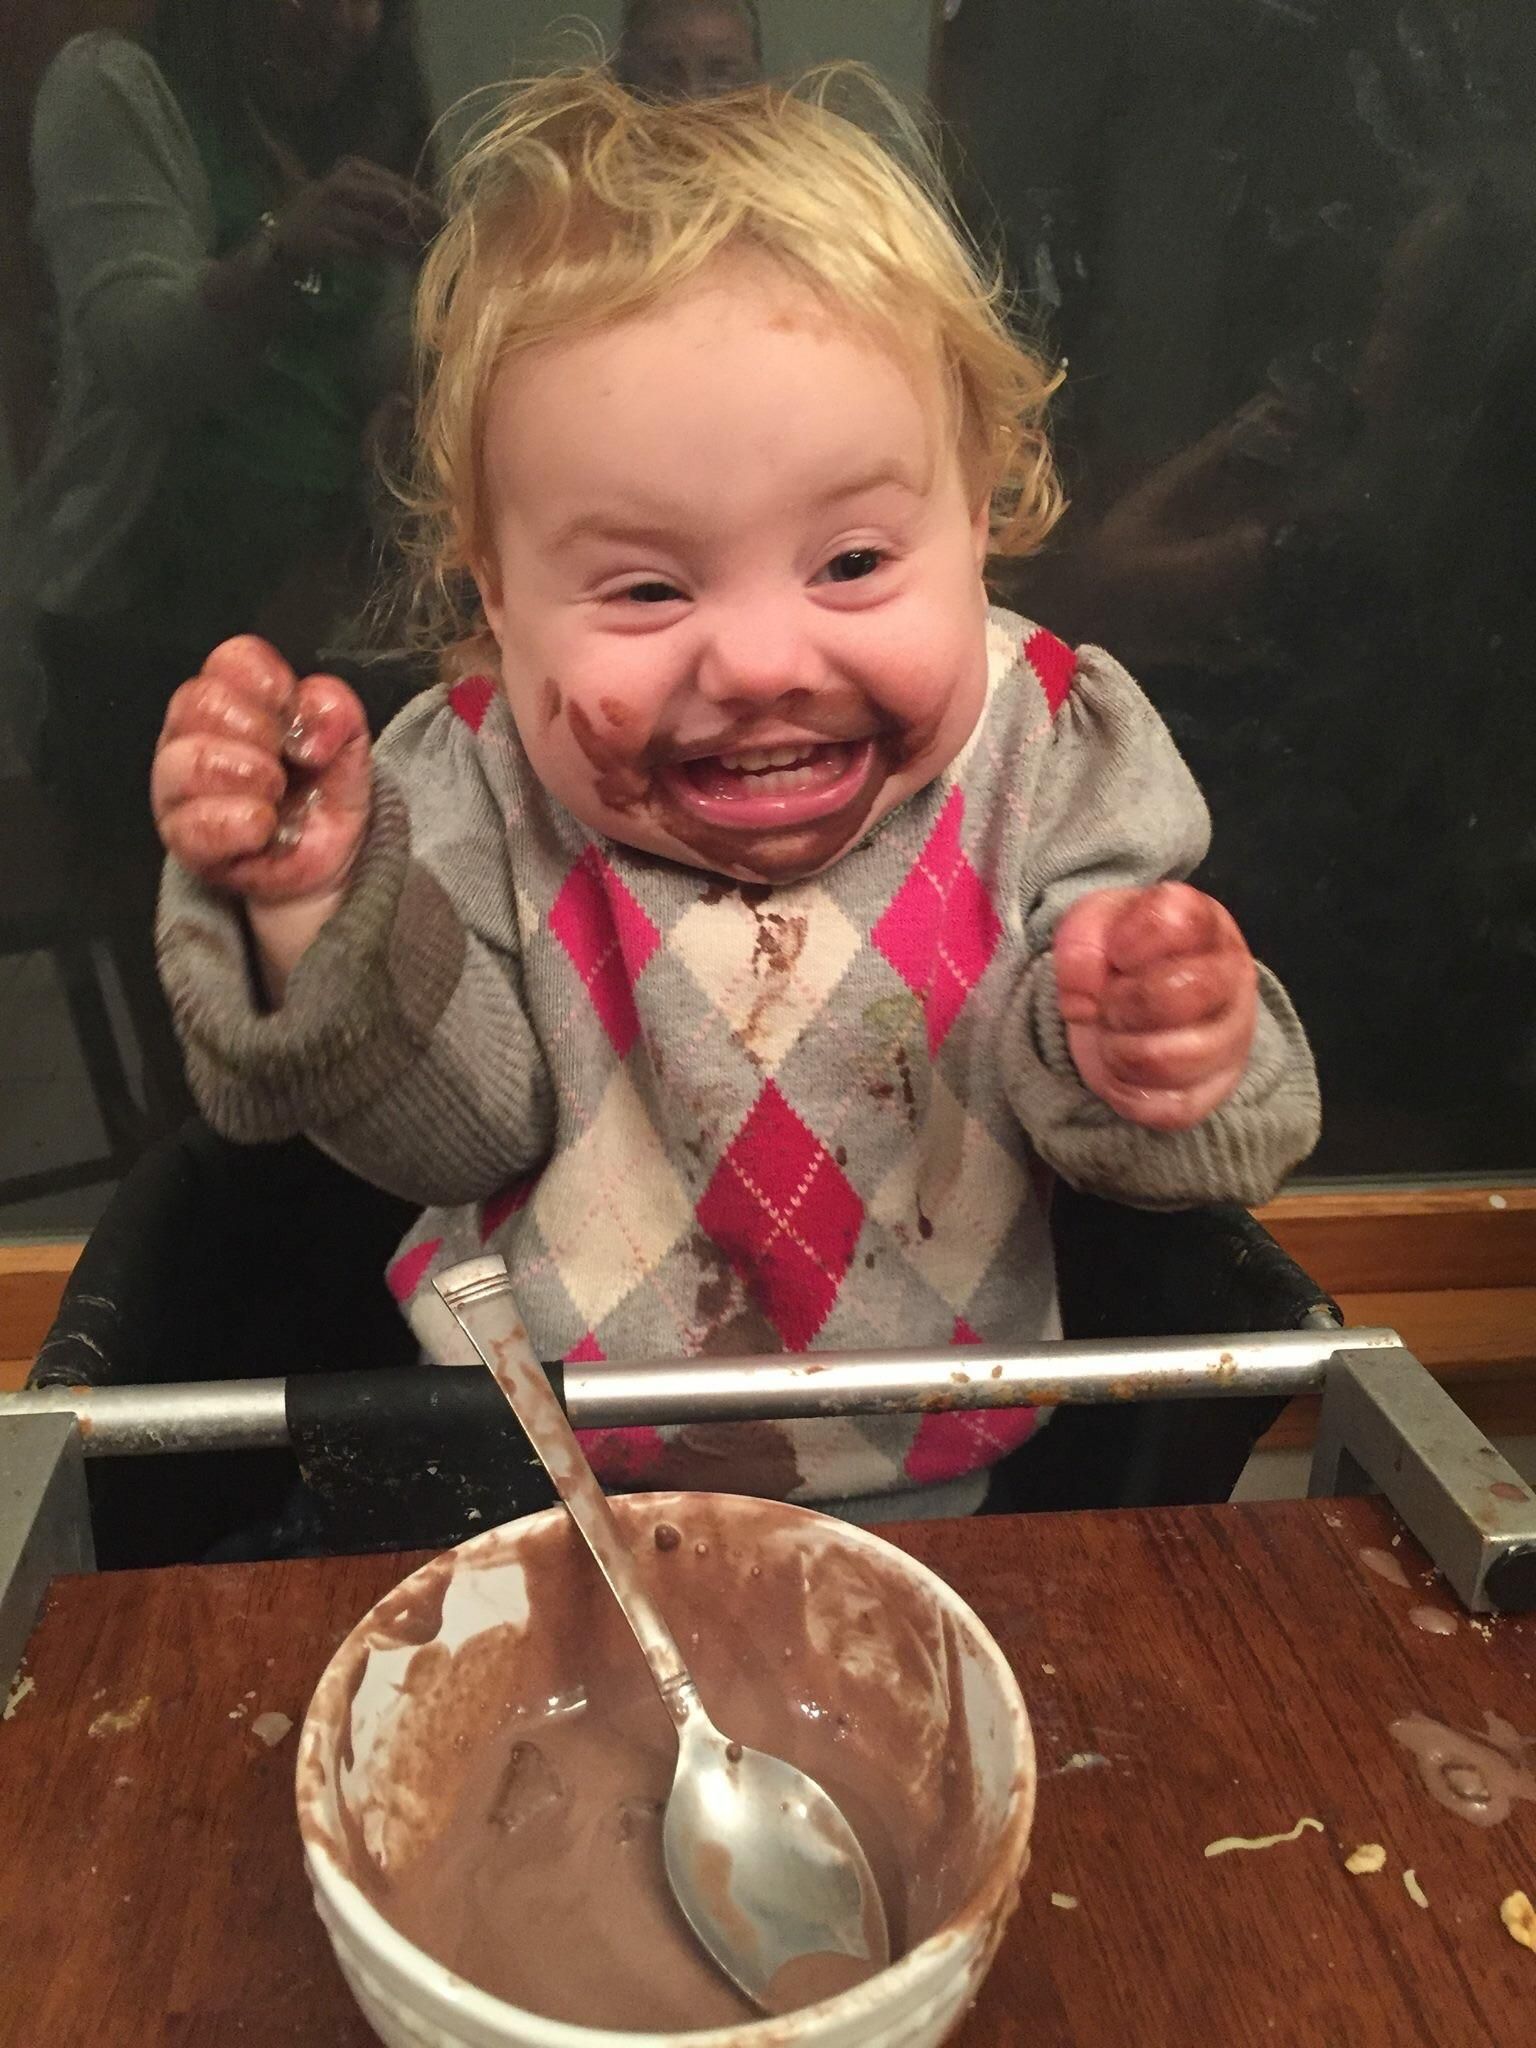 My daughter’s reaction to chocolate ice cream.